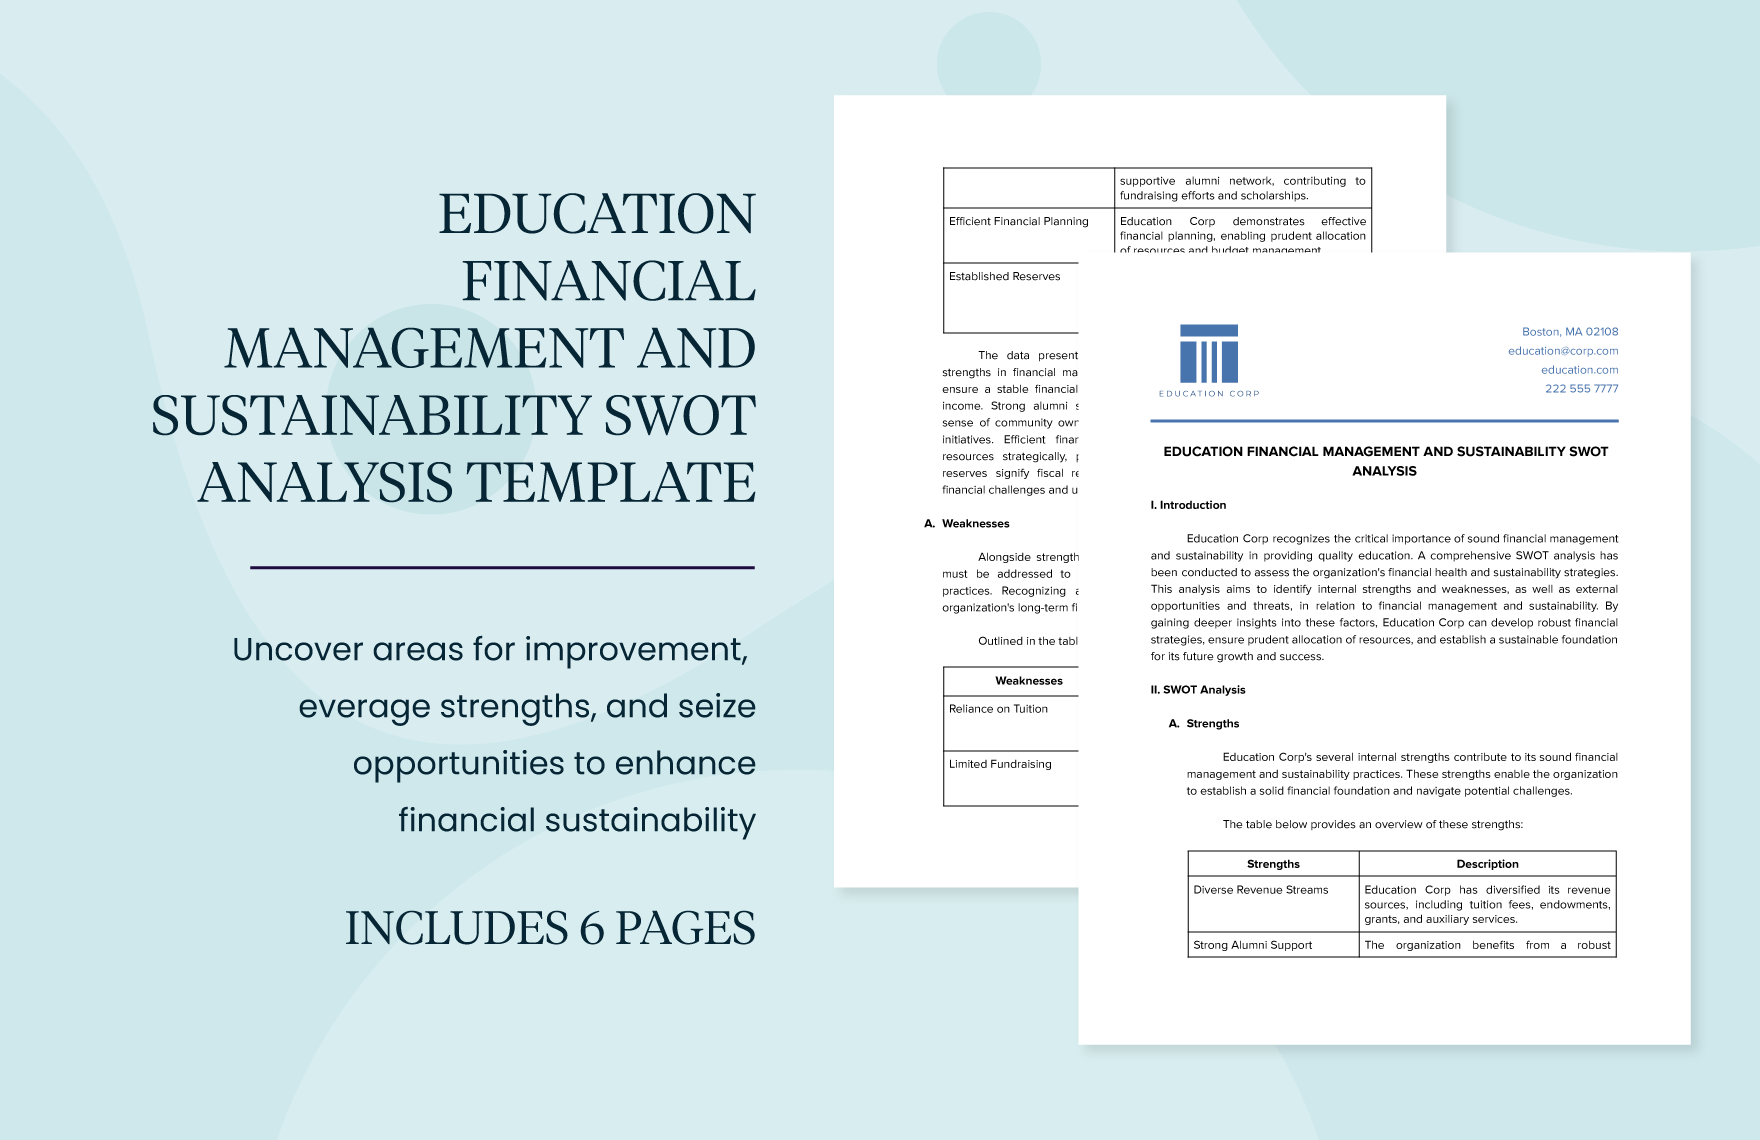 Education Financial Management and Sustainability SWOT Analysis Template